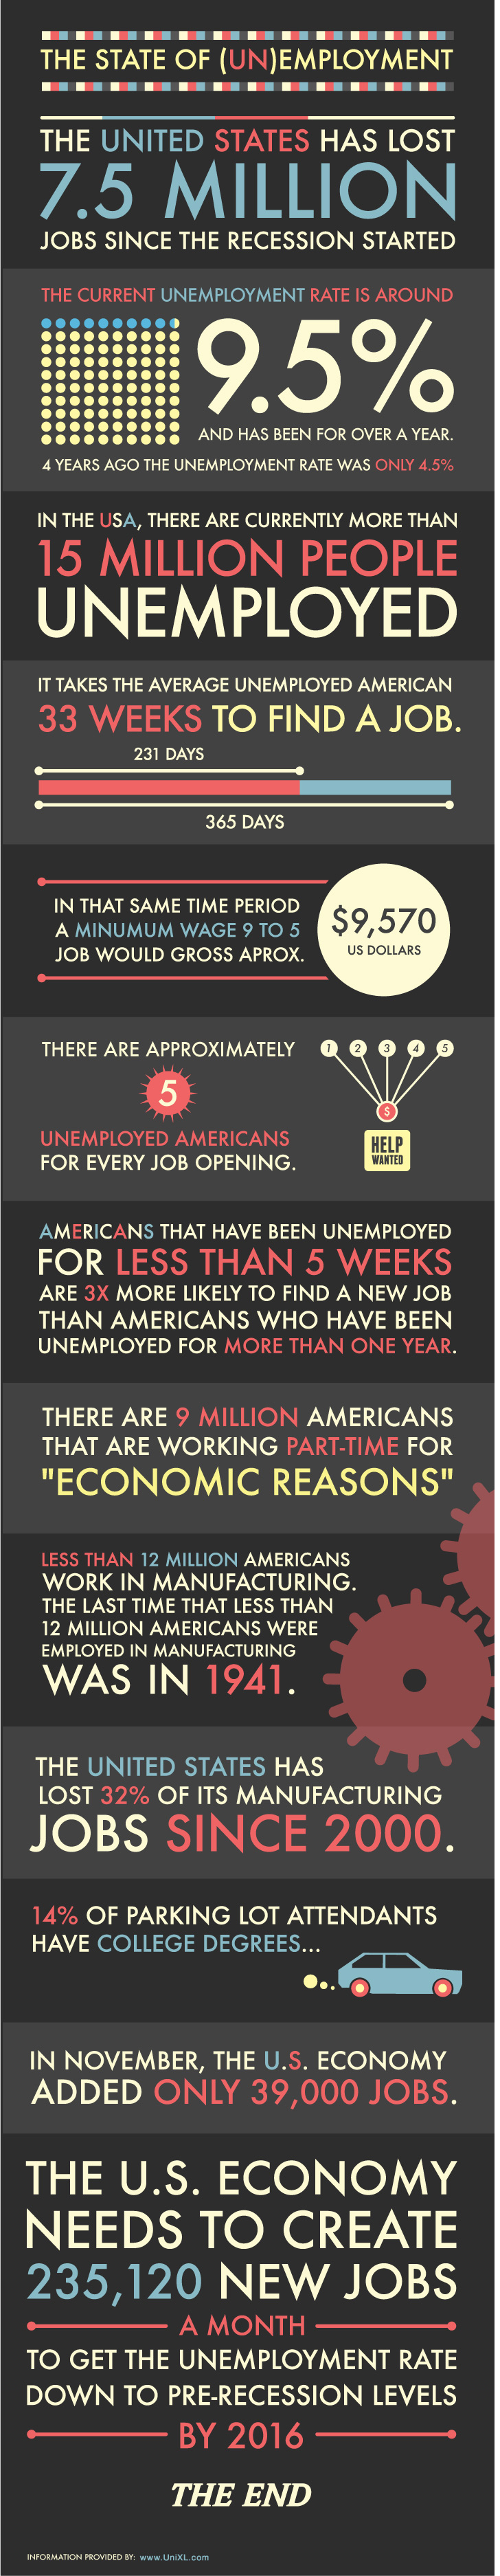 The State of Unemployment Infographic